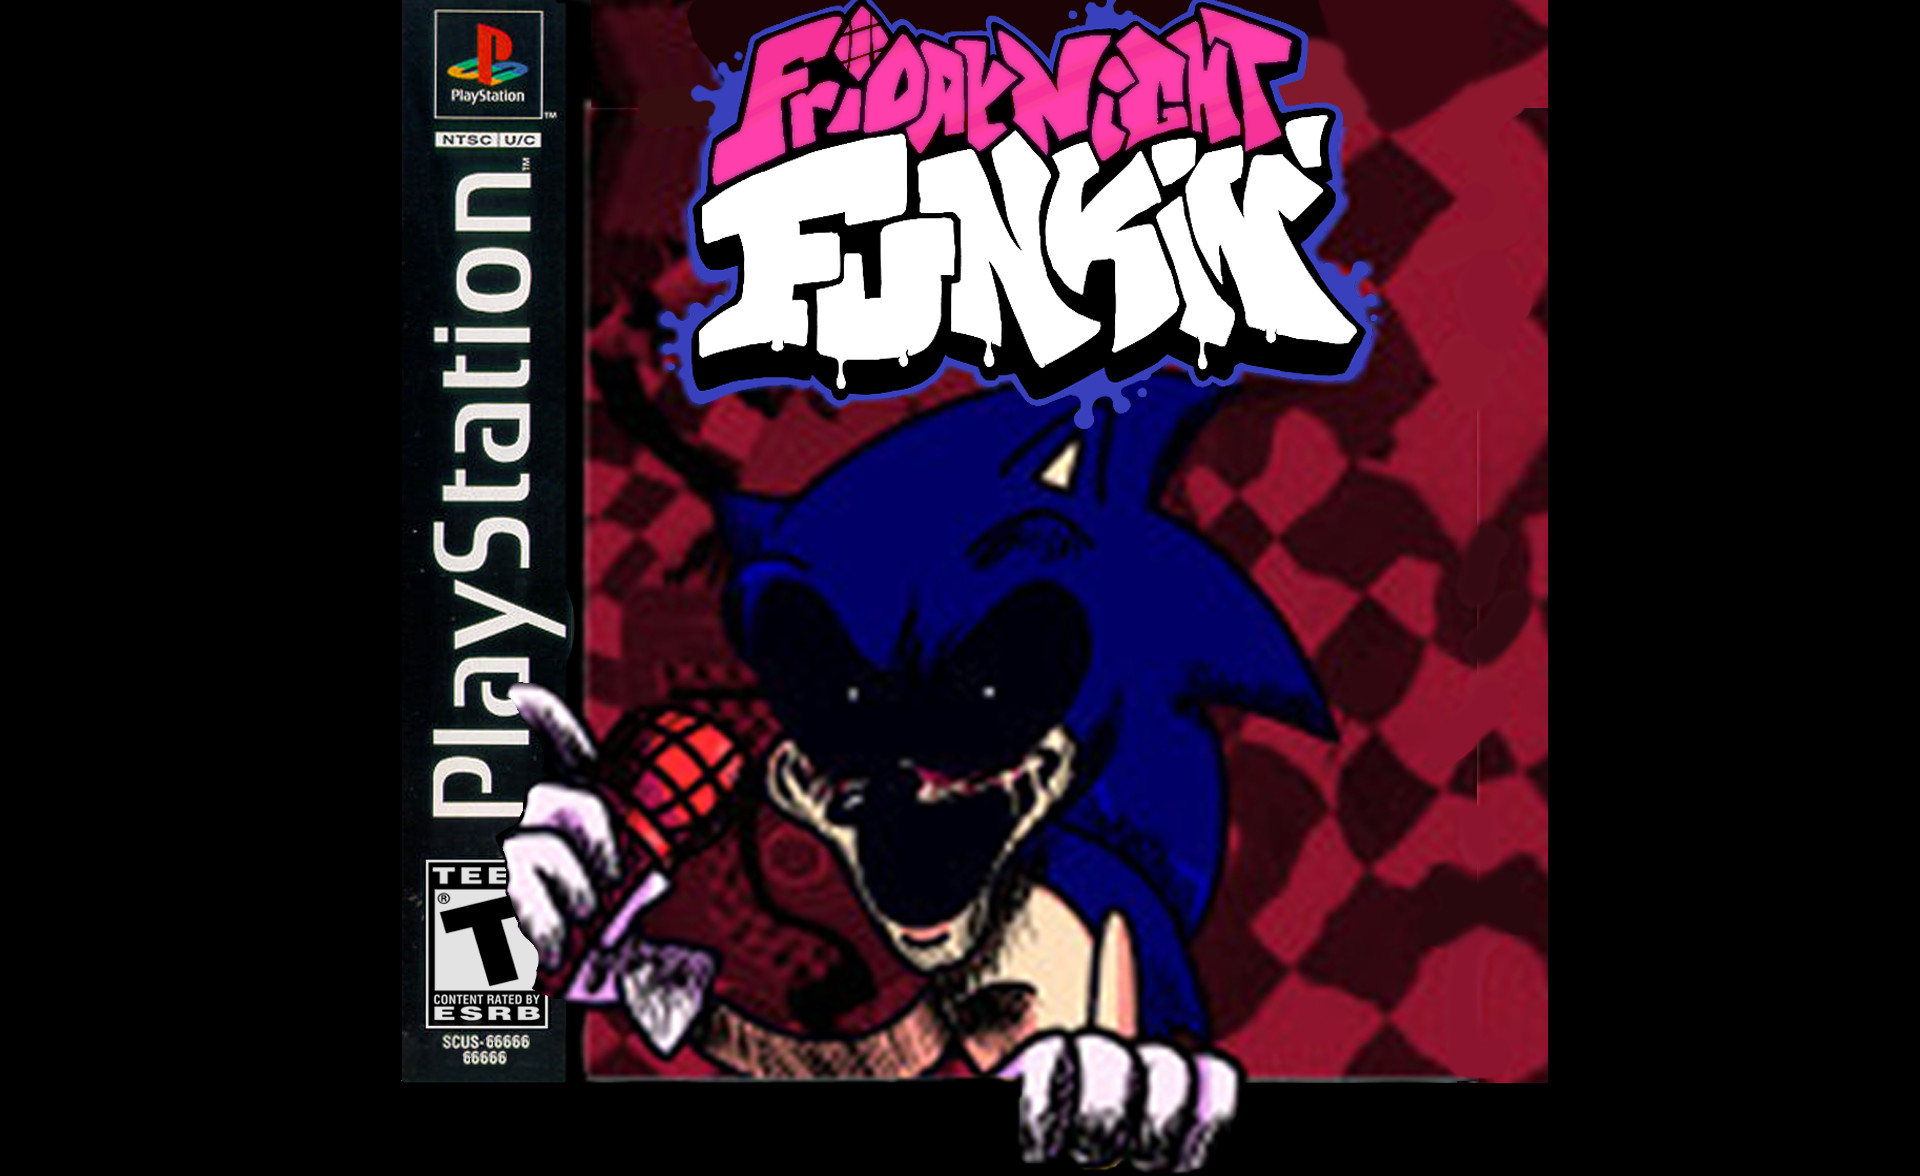 Sonic.exe Game over cover [Friday Night Funkin'] [Mods]